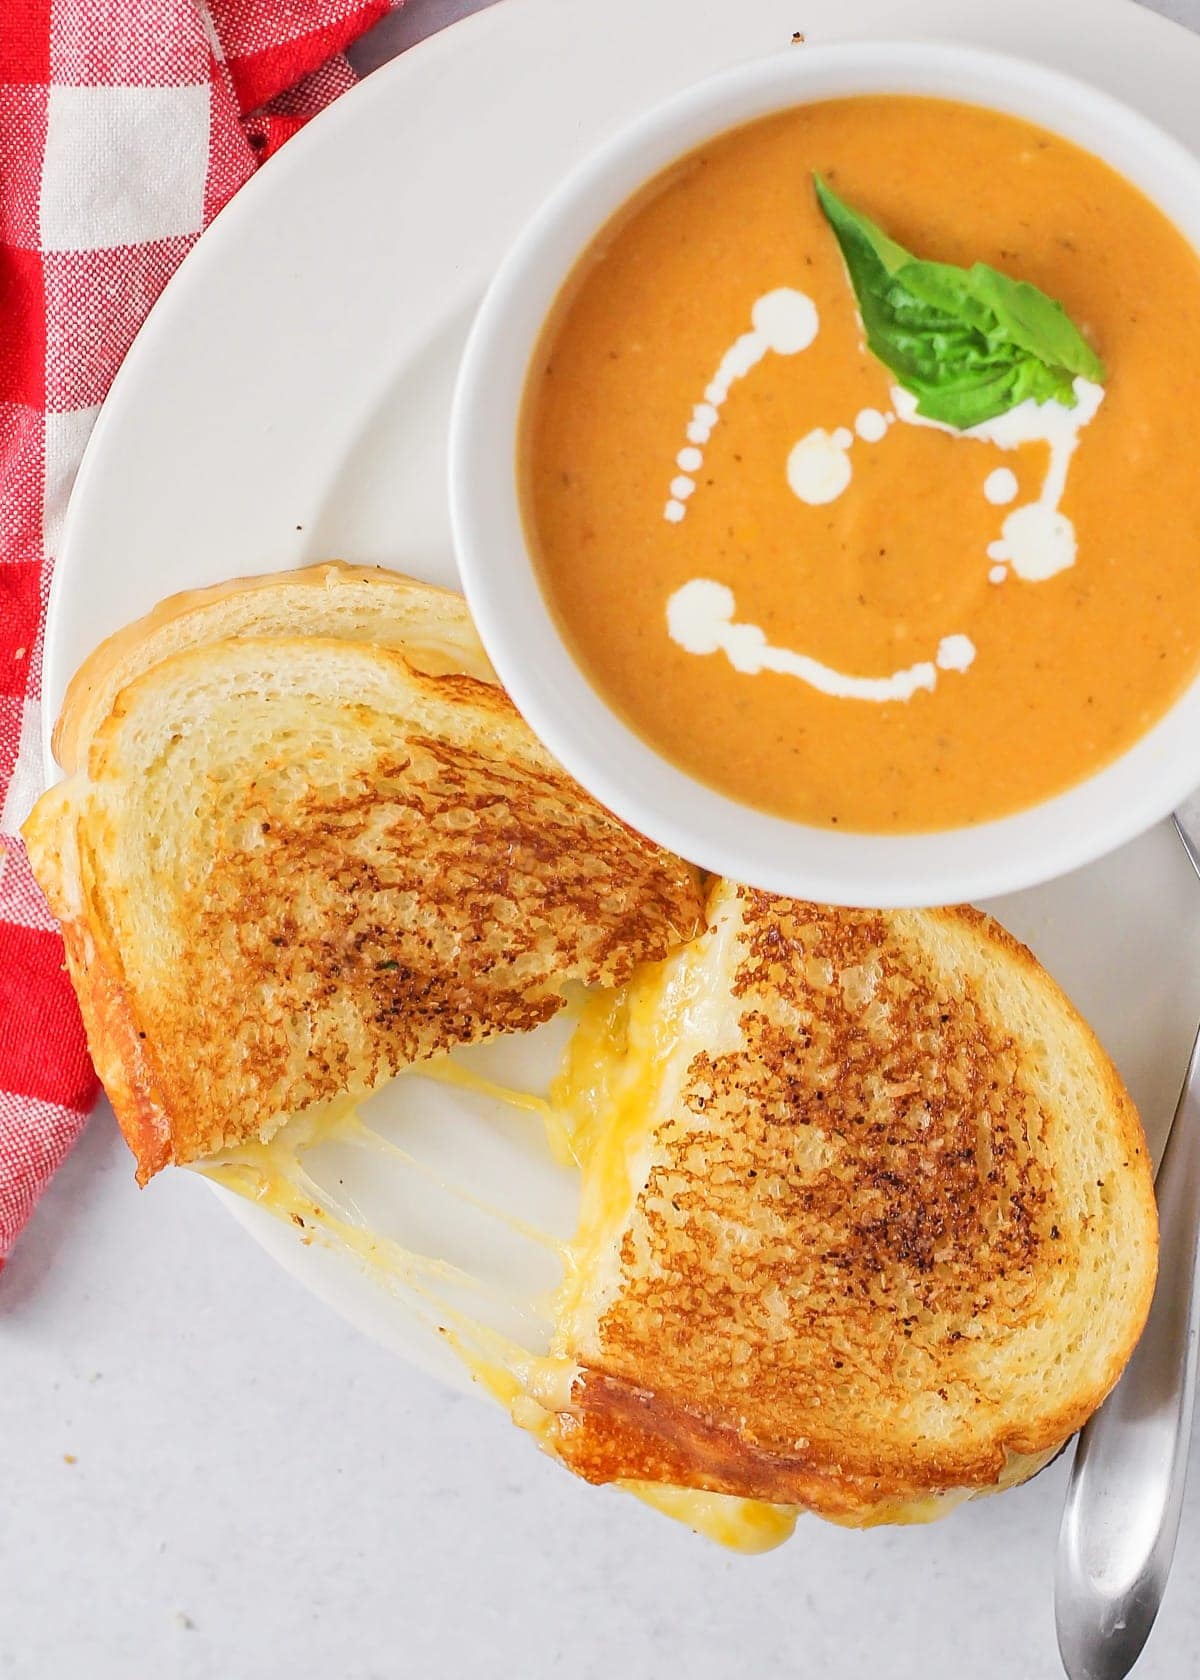 Best grilled cheese sandwich on a plate with a side of tomato soup.